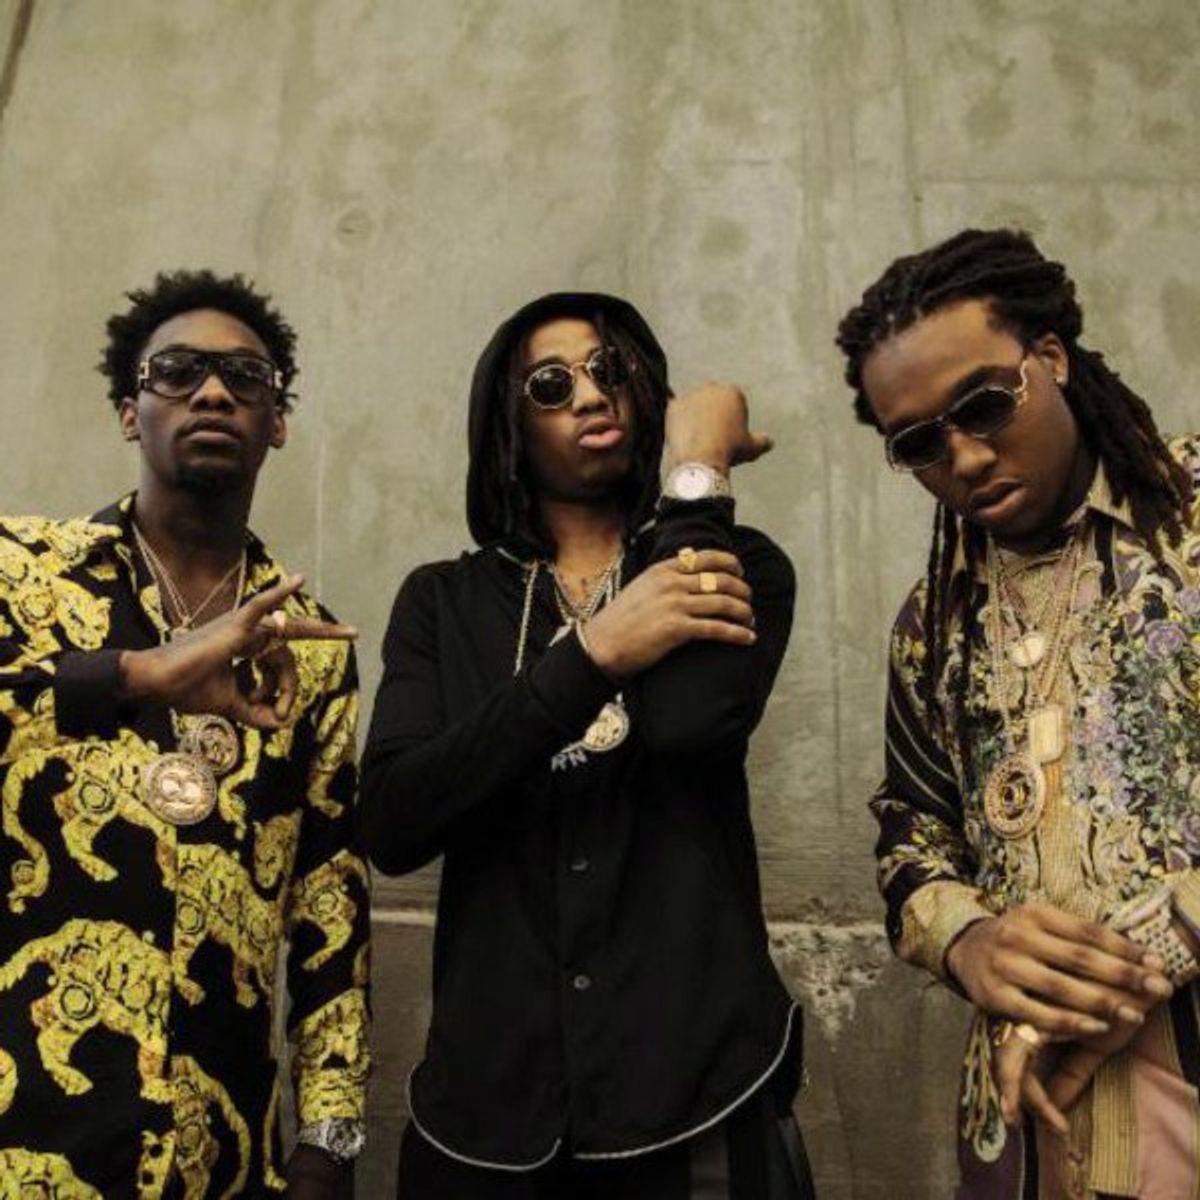 Migos; Adding To The Culture